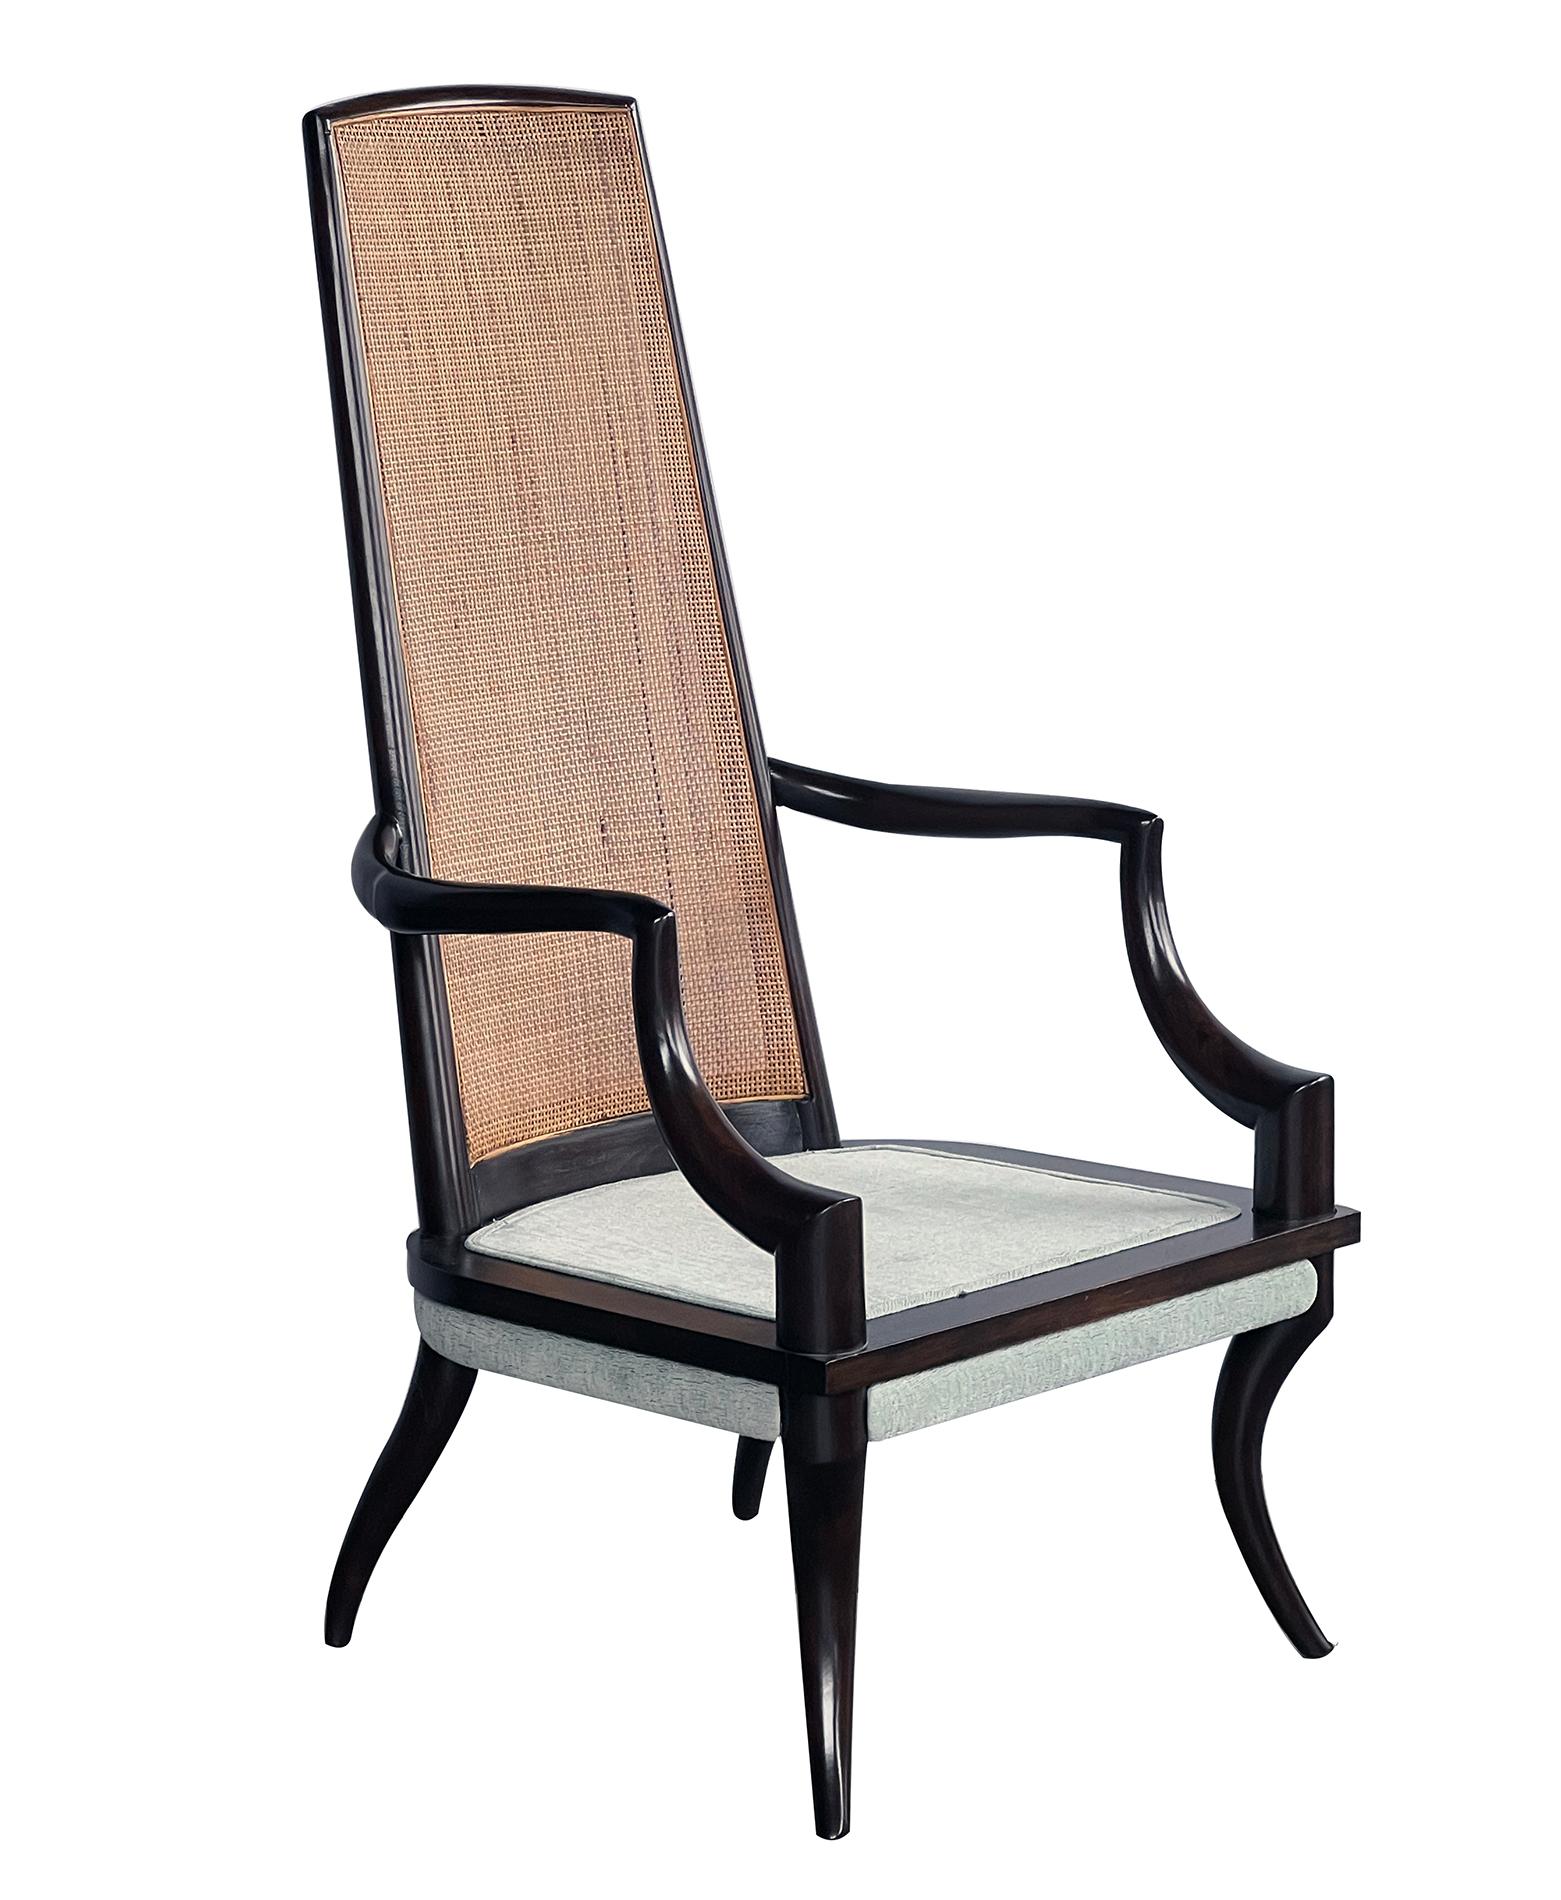 with deep brown lacquered finish, the tall graduated caned back above a loose cushion flanked by down-swept arms all over splayed legs